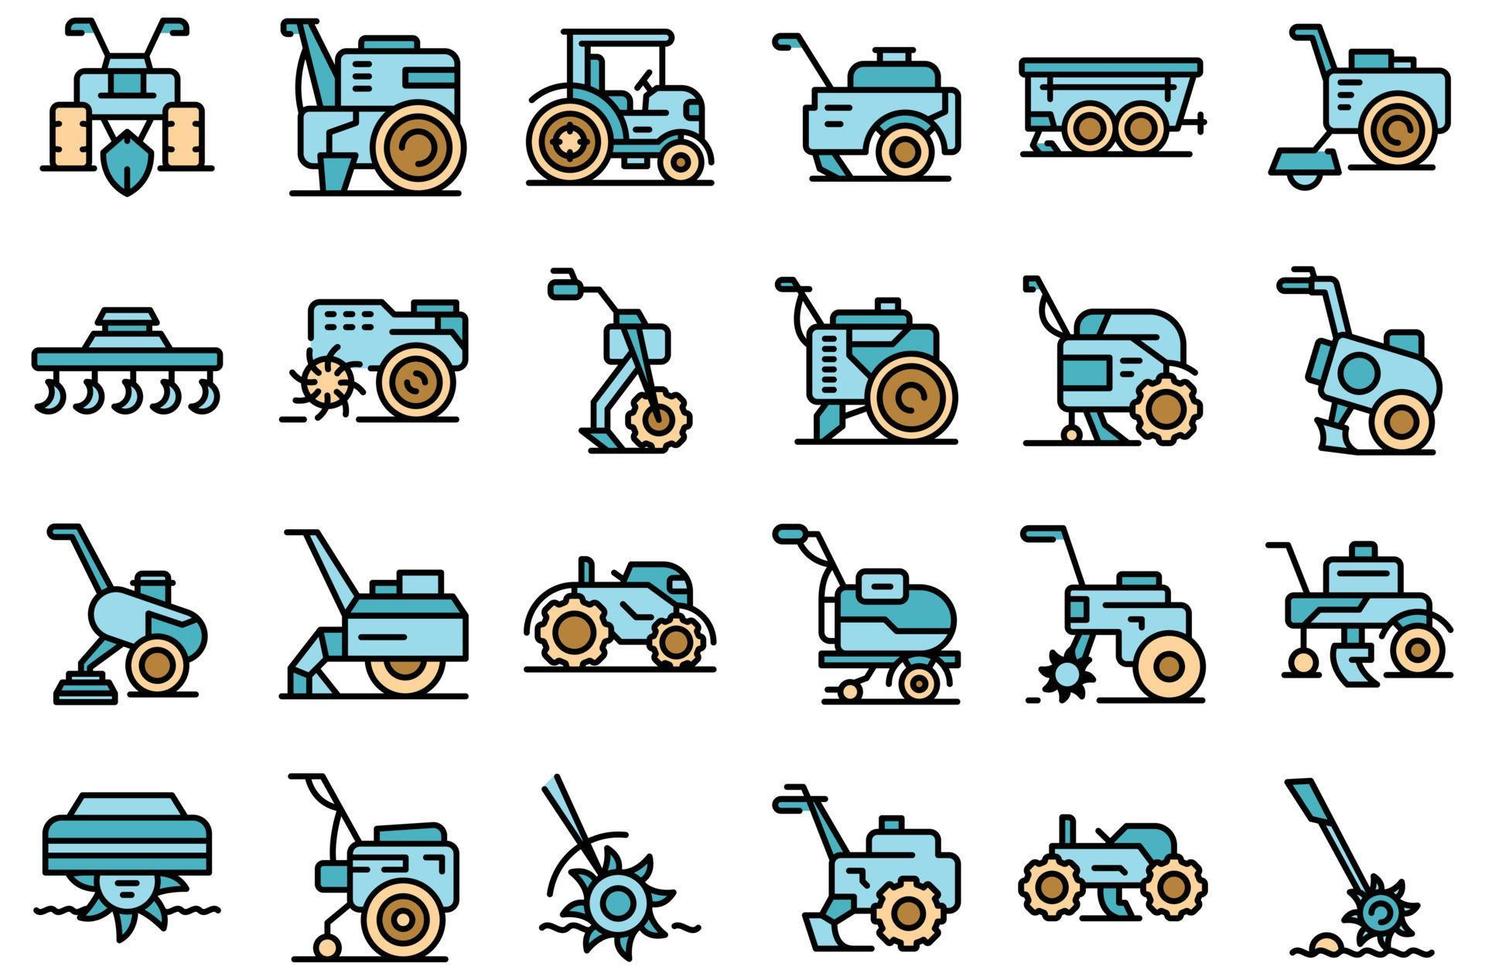 Cultivator machine icon outline vector. Agriculture agronomy vector